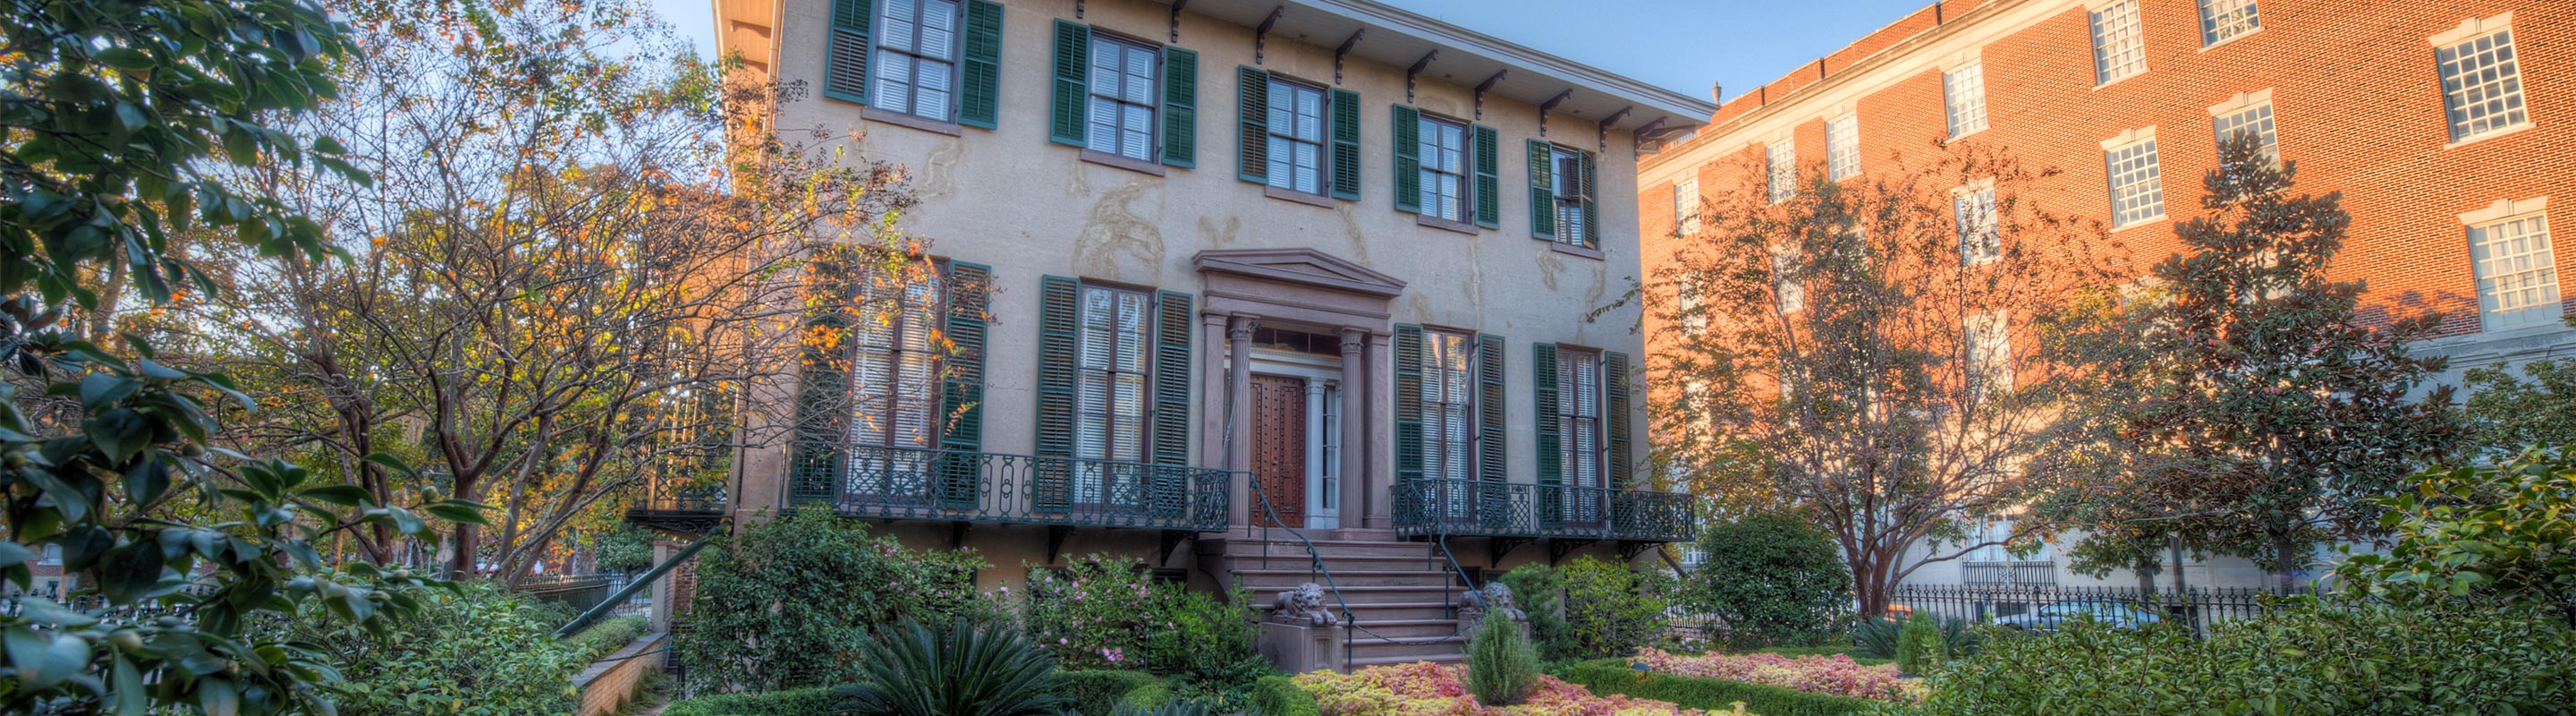 The Andrew Low House Historic Homes in Savannah House Tours